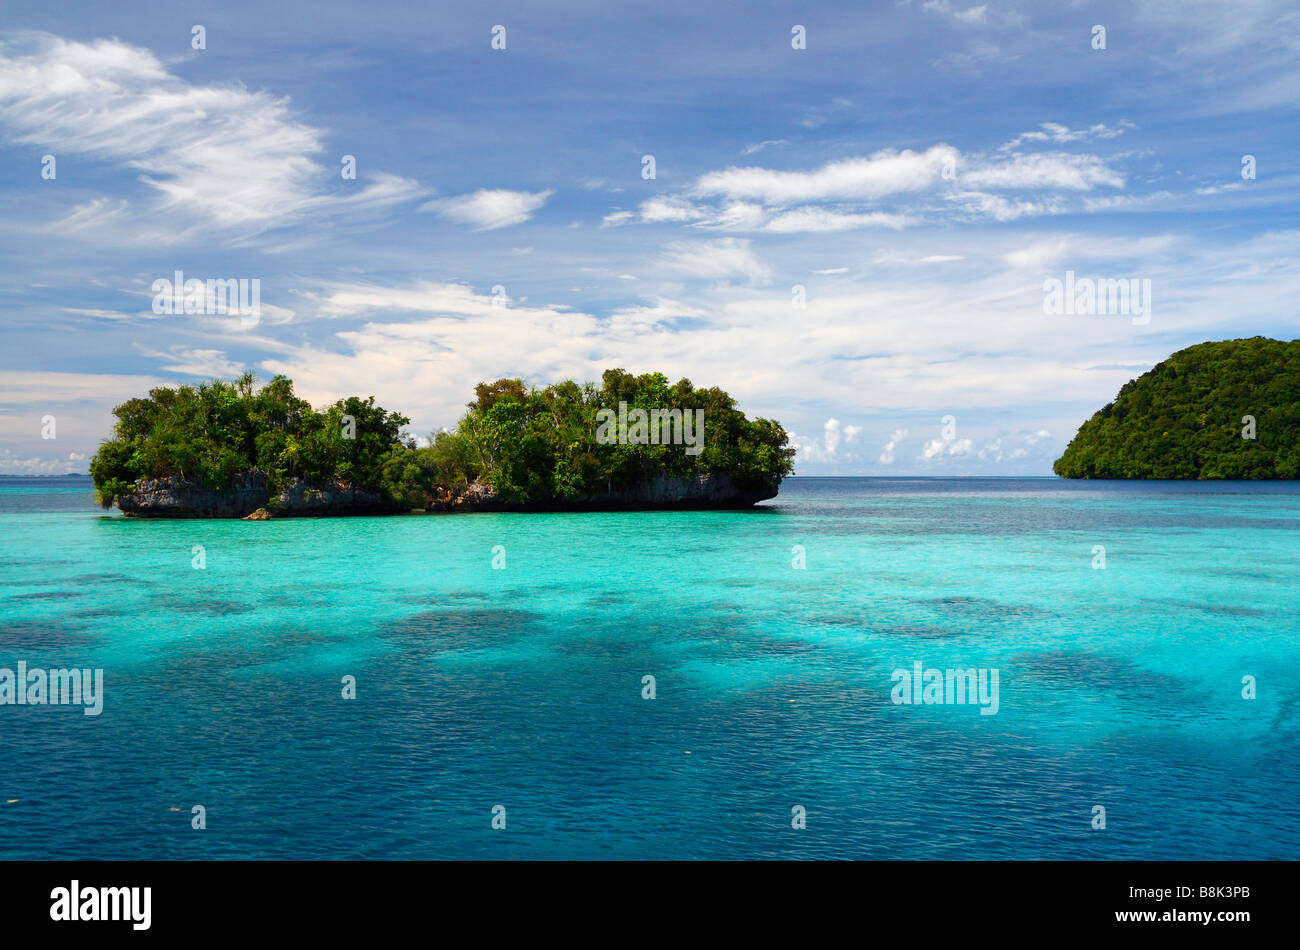 Rock islands of Palau surrounded by shallow reefs with turquoise water and blue sky with light clouds Stock Photo